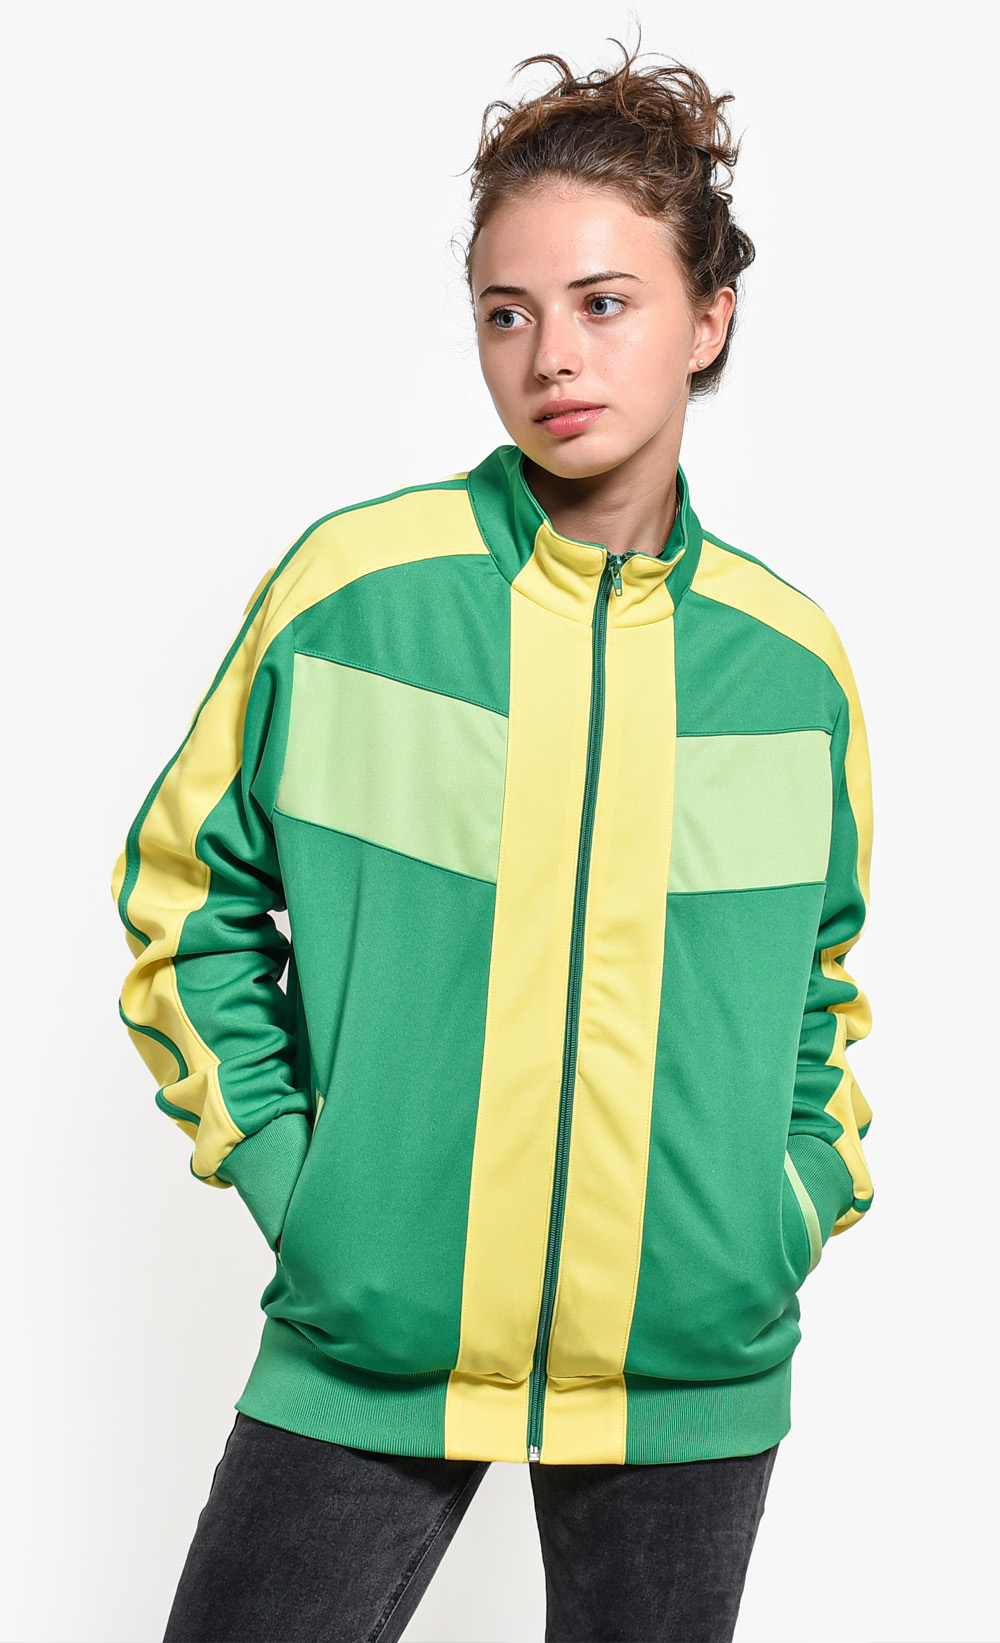 Persona 4 Golden Chie Sports Jacket - Insert Coin Clothing